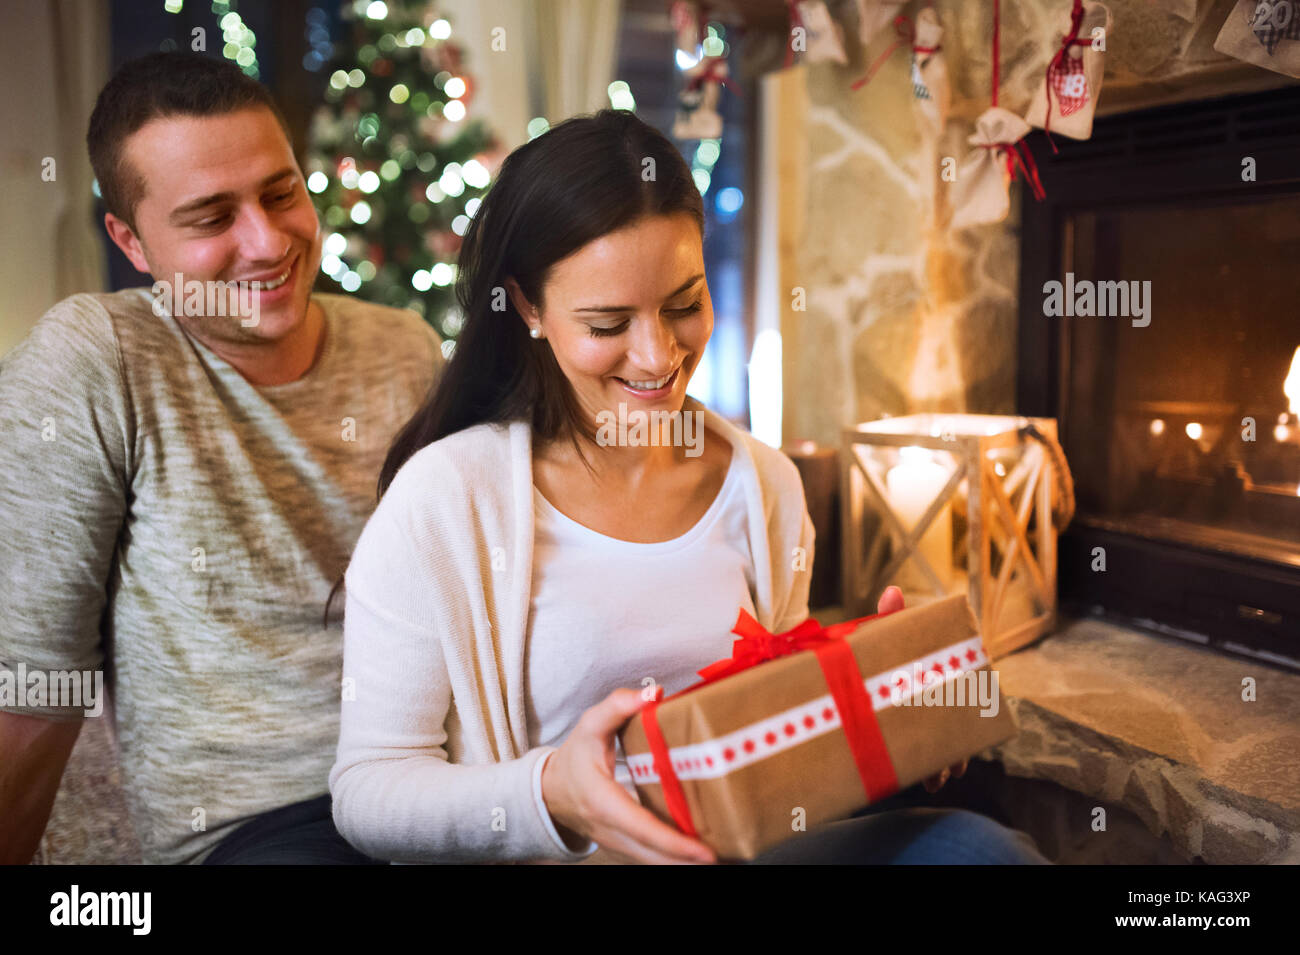 Couple in front of fireplace. Christmas time. Stock Photo